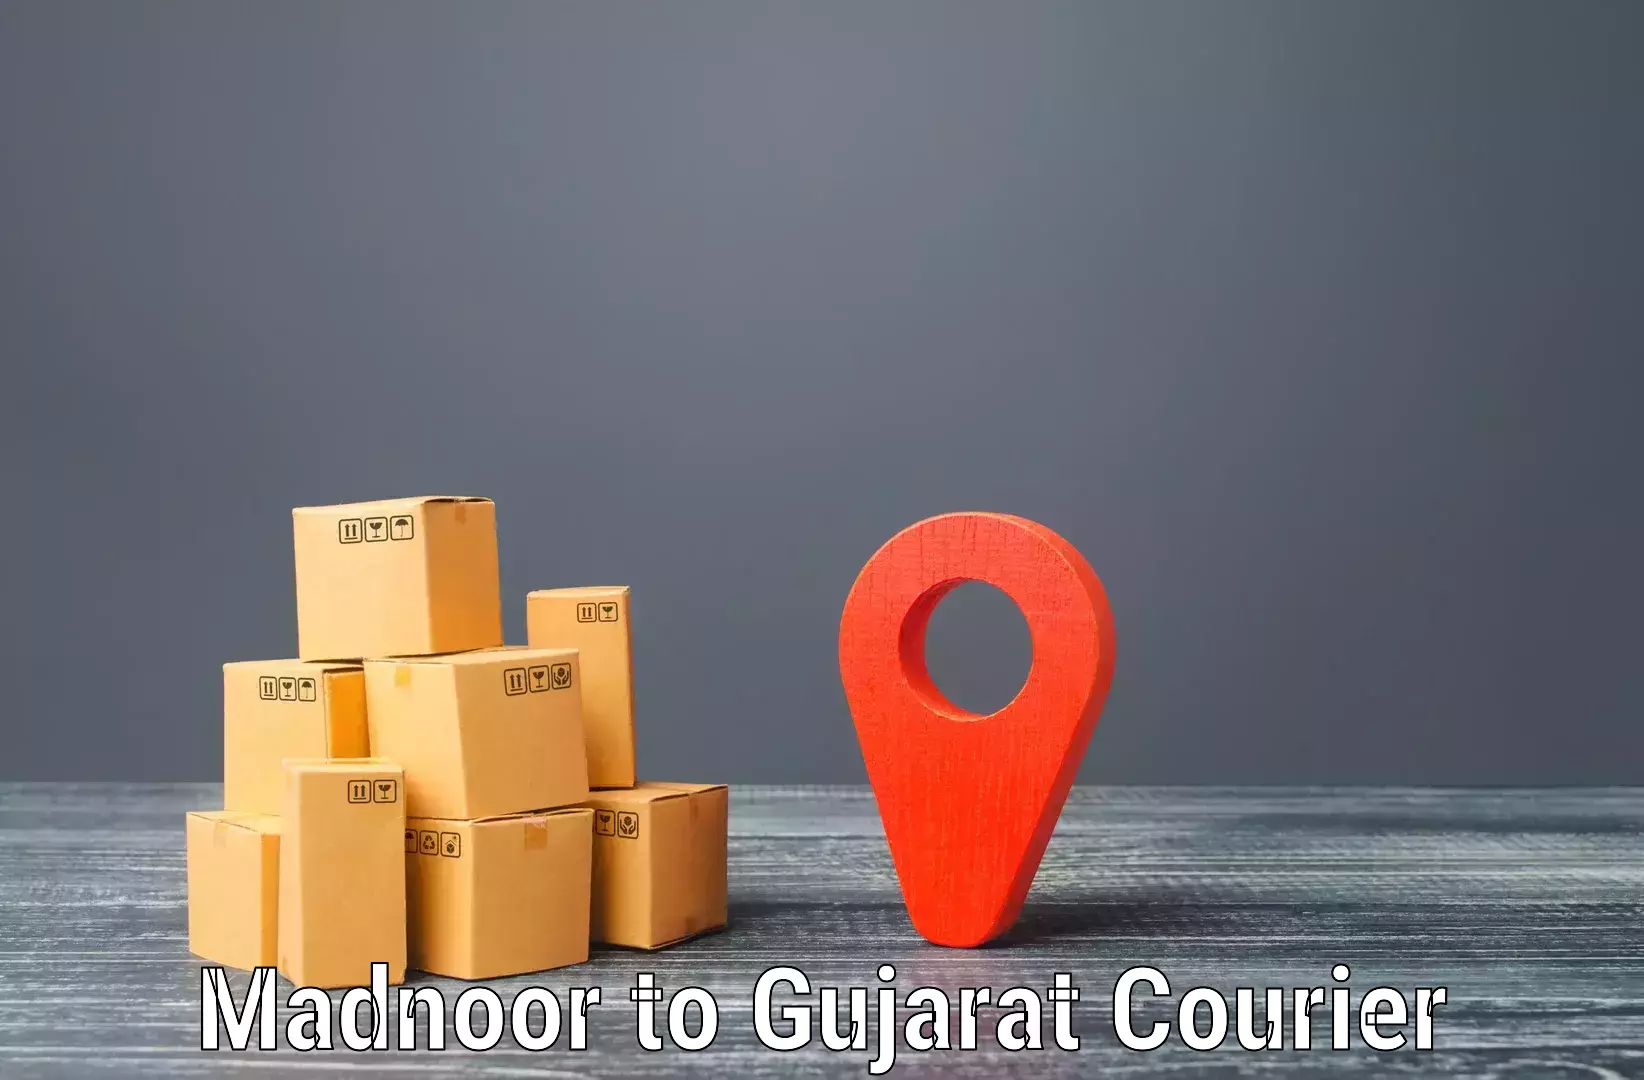 Fast shipping solutions Madnoor to GIDC